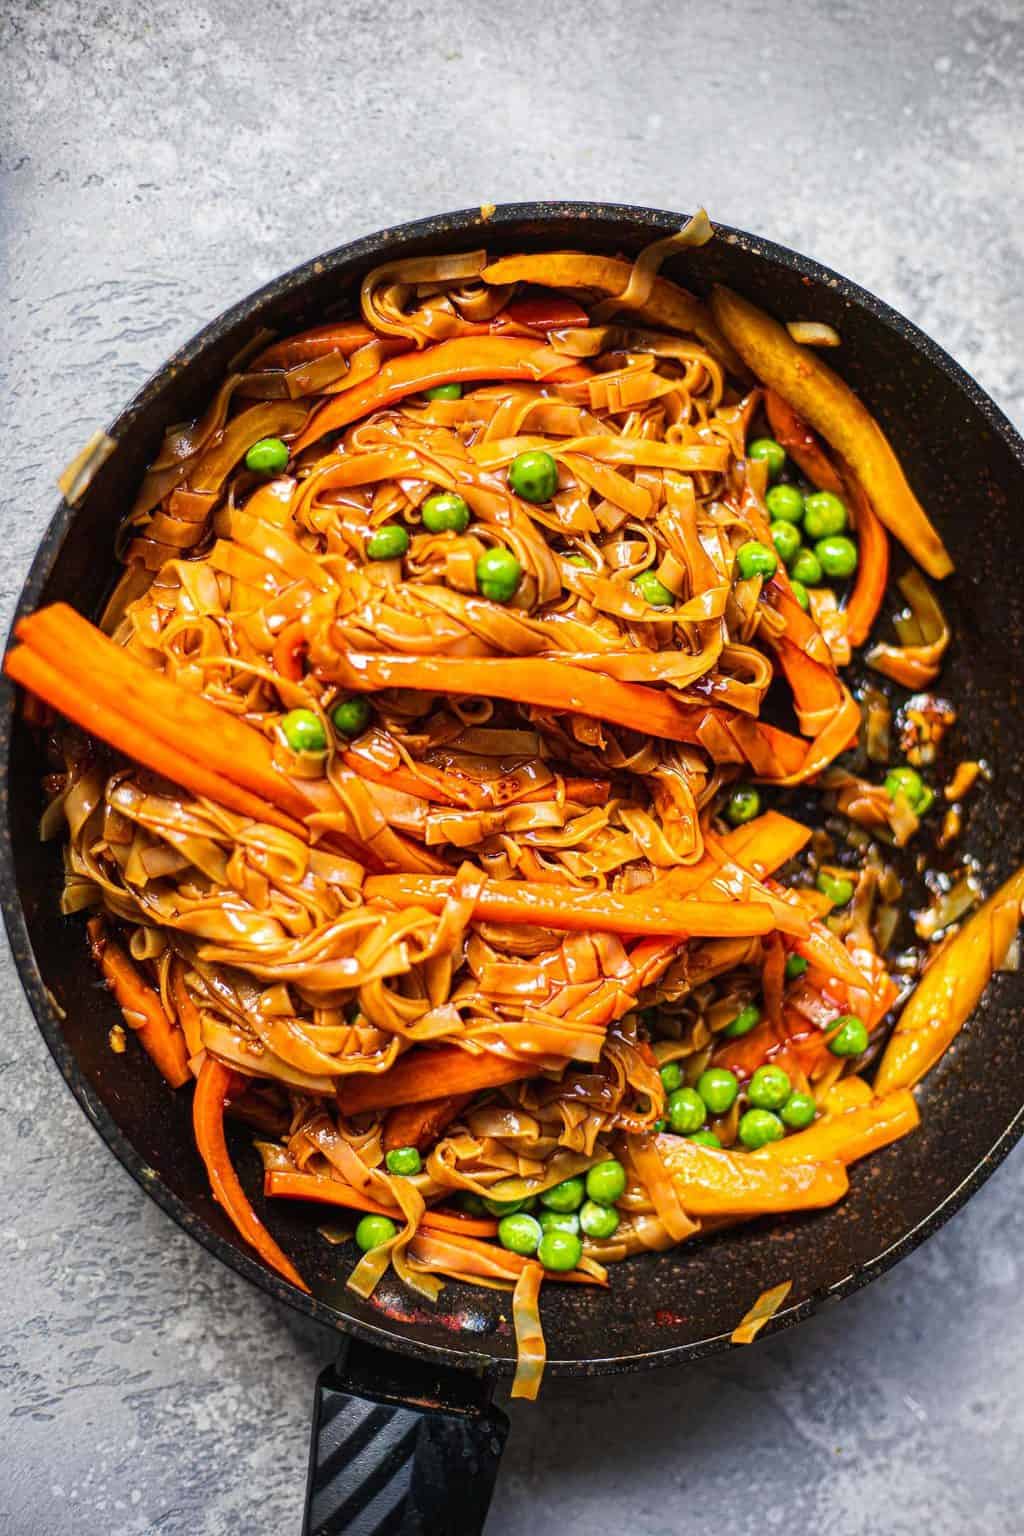 Frying pan with noodles and vegetables